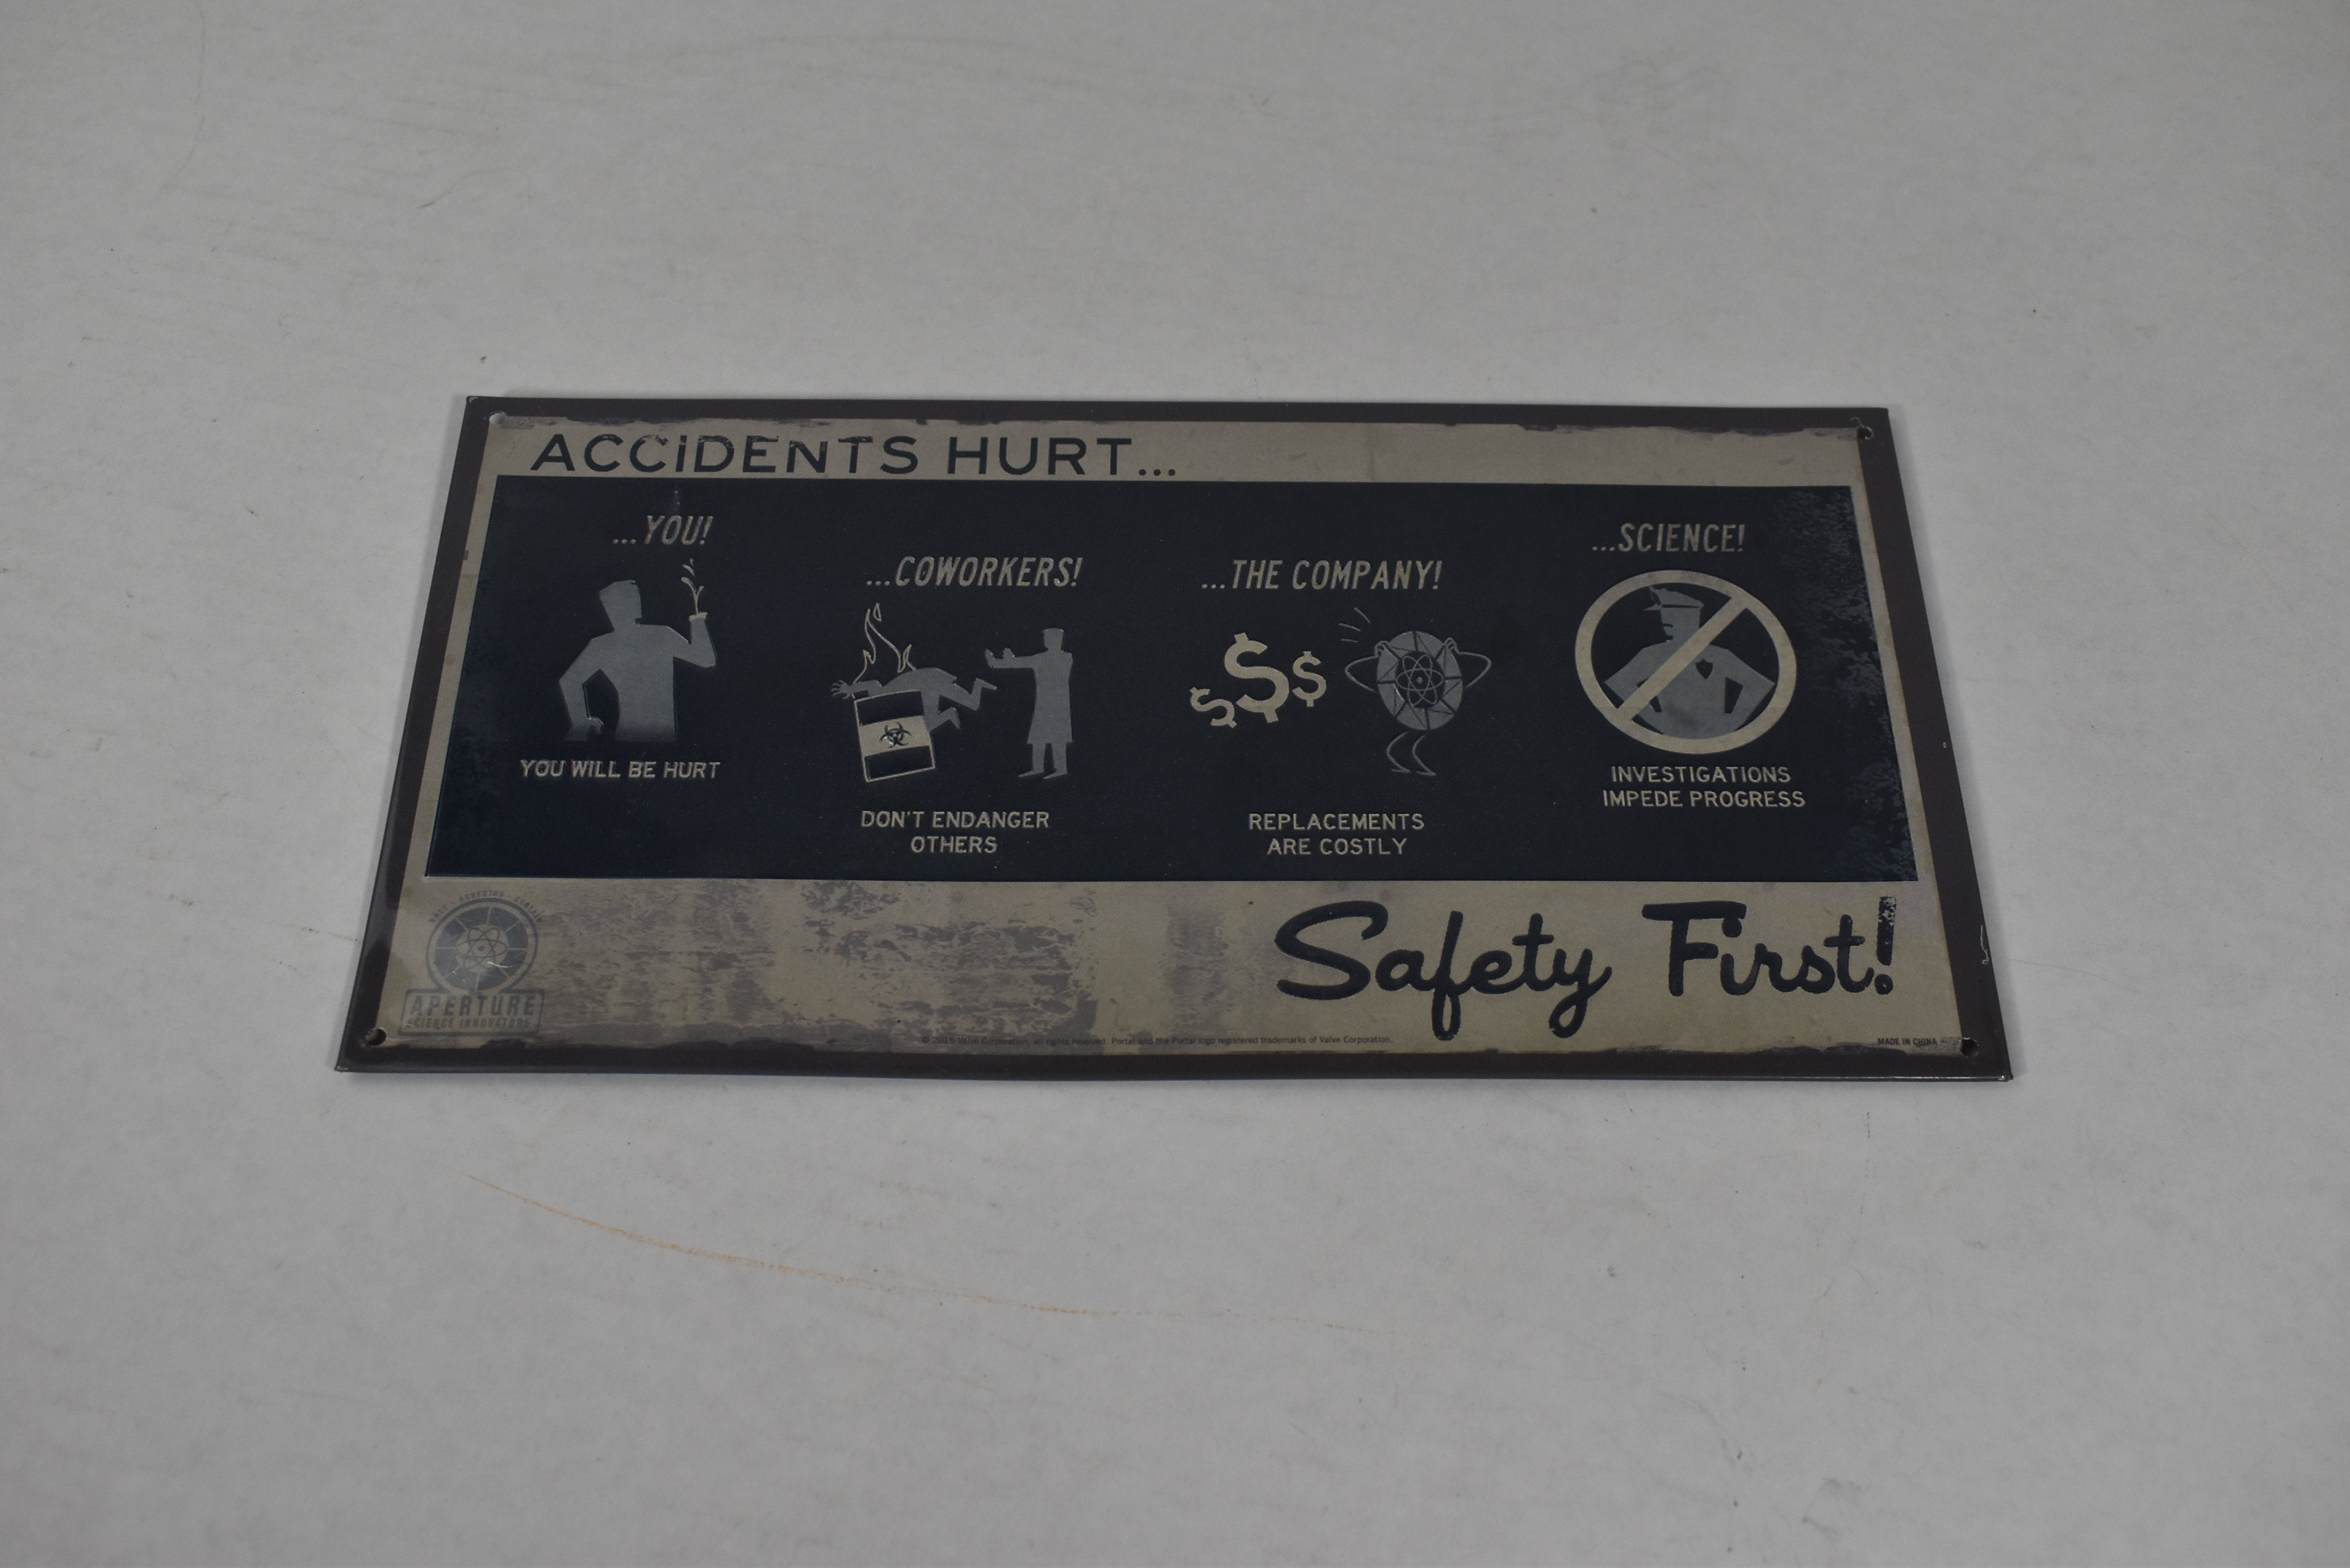 Safety first sign nerd block aperture science innovation 2015